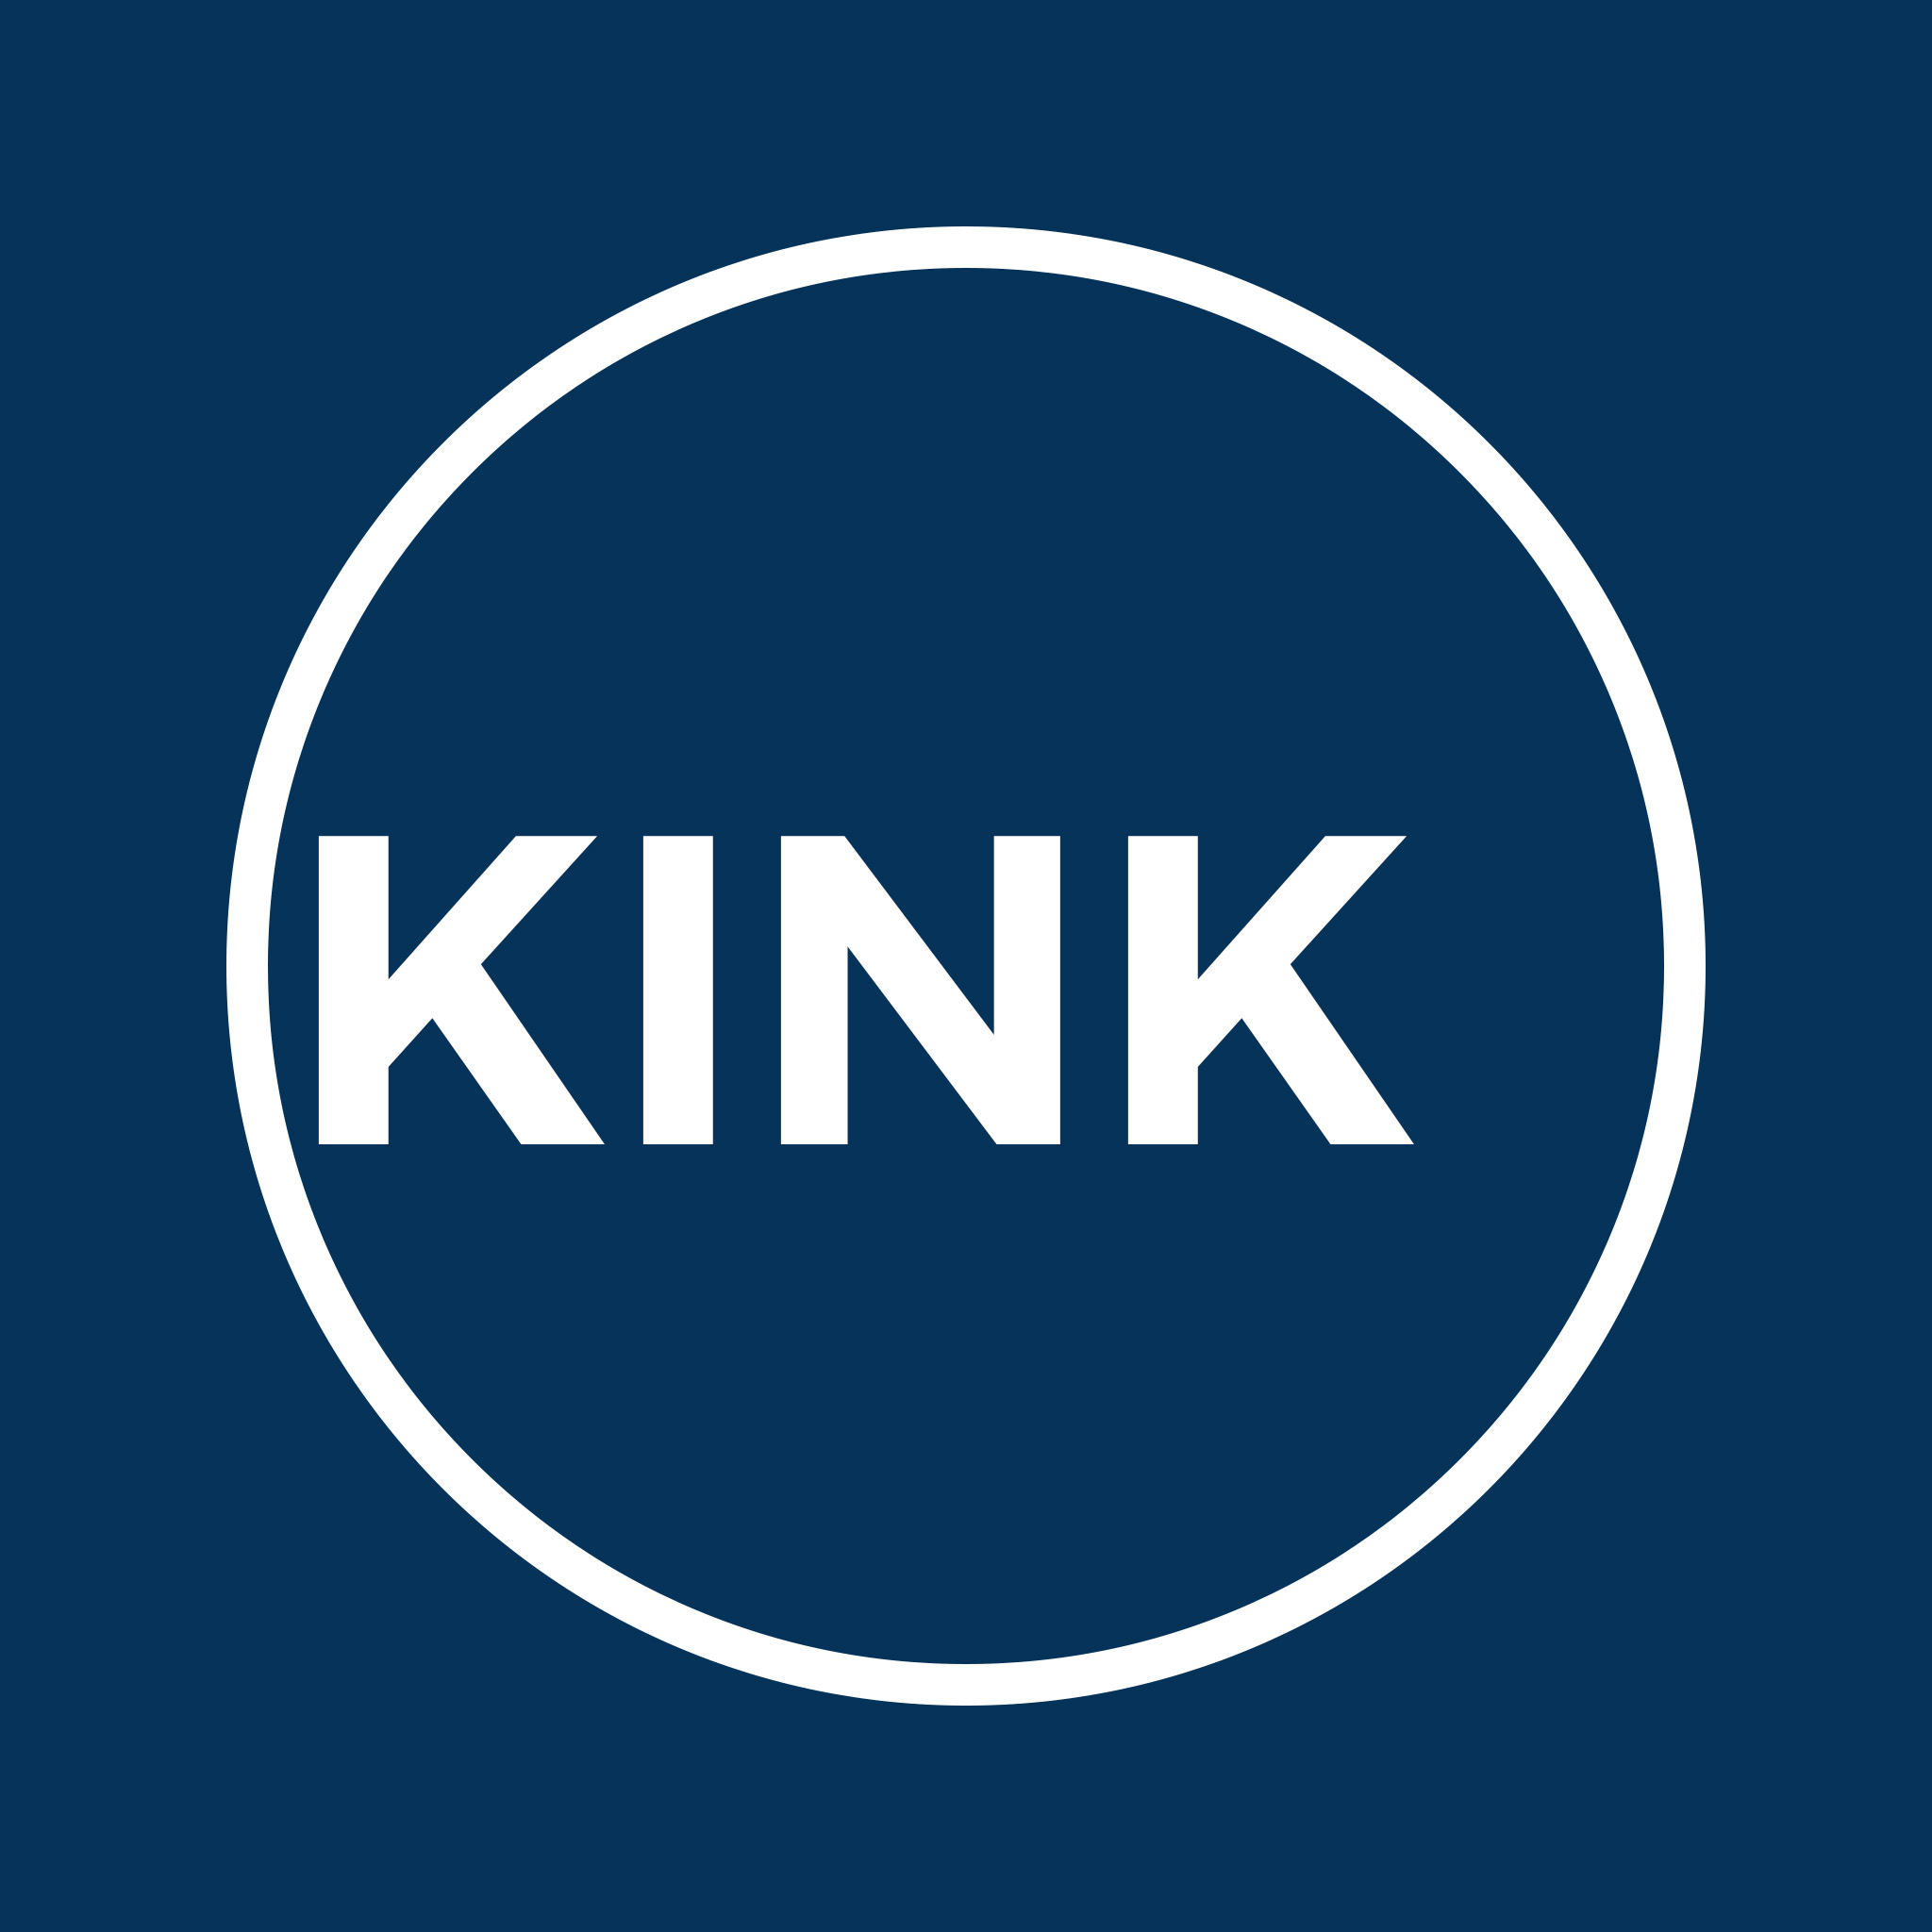 The word KINK in white surrounded by a white circle on a blue background.